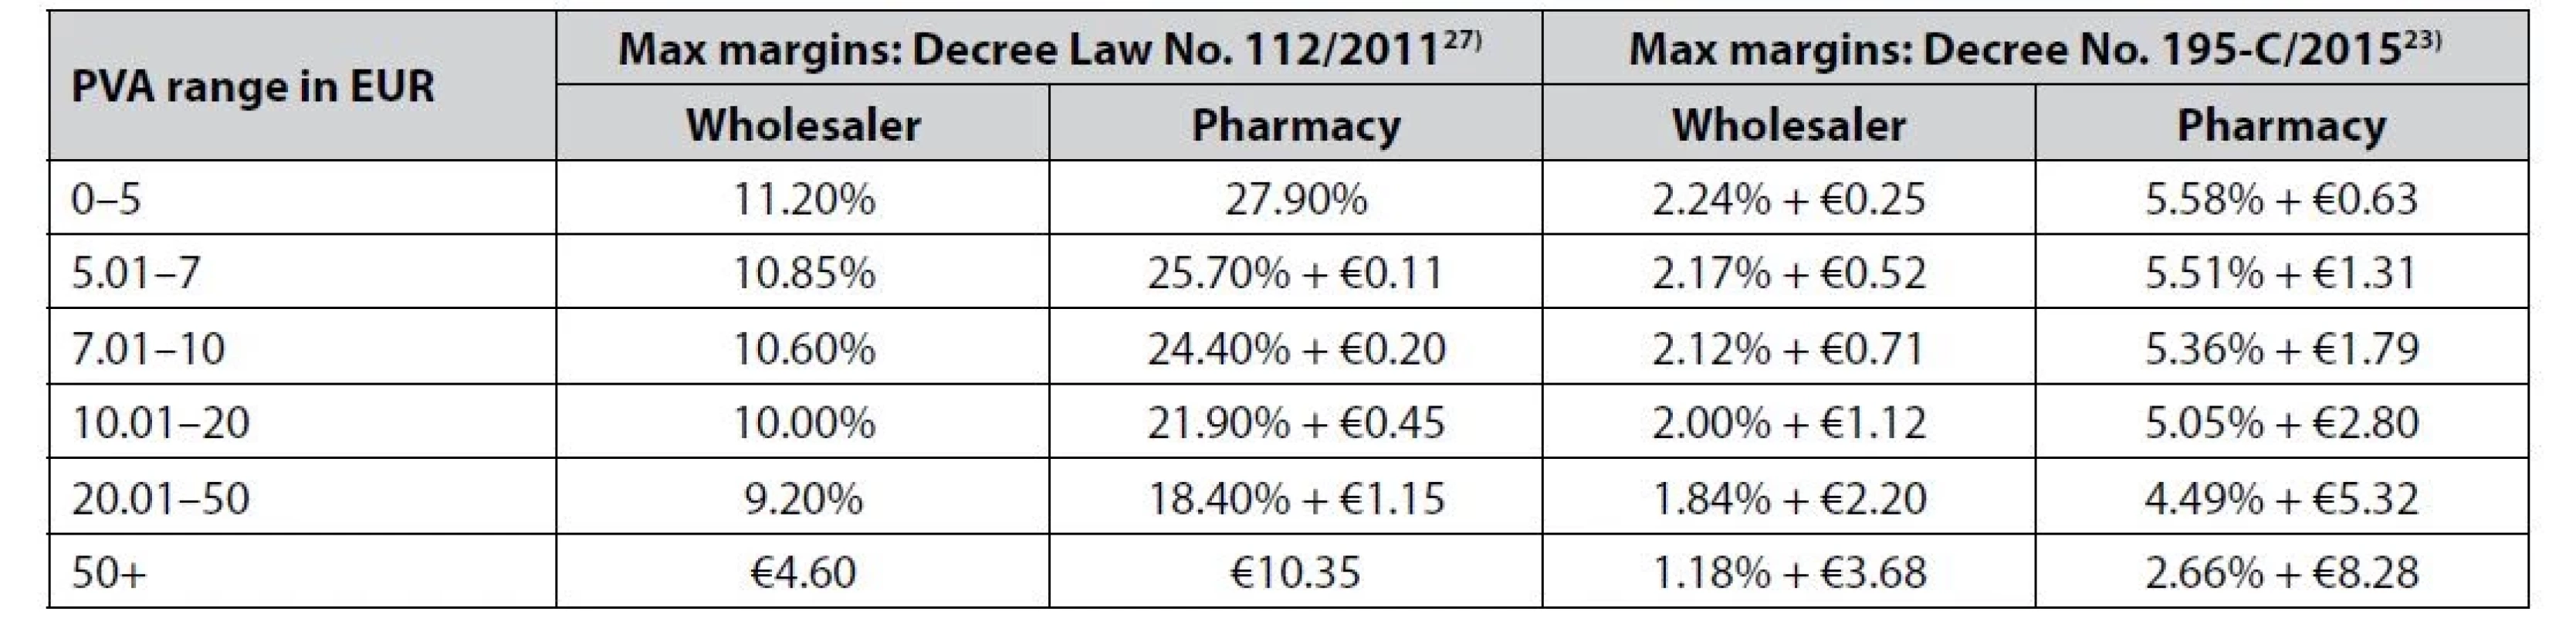 Allowed maximum margins on reimbursed prescription and non-prescription drugs by regulation from 2011 and 2015